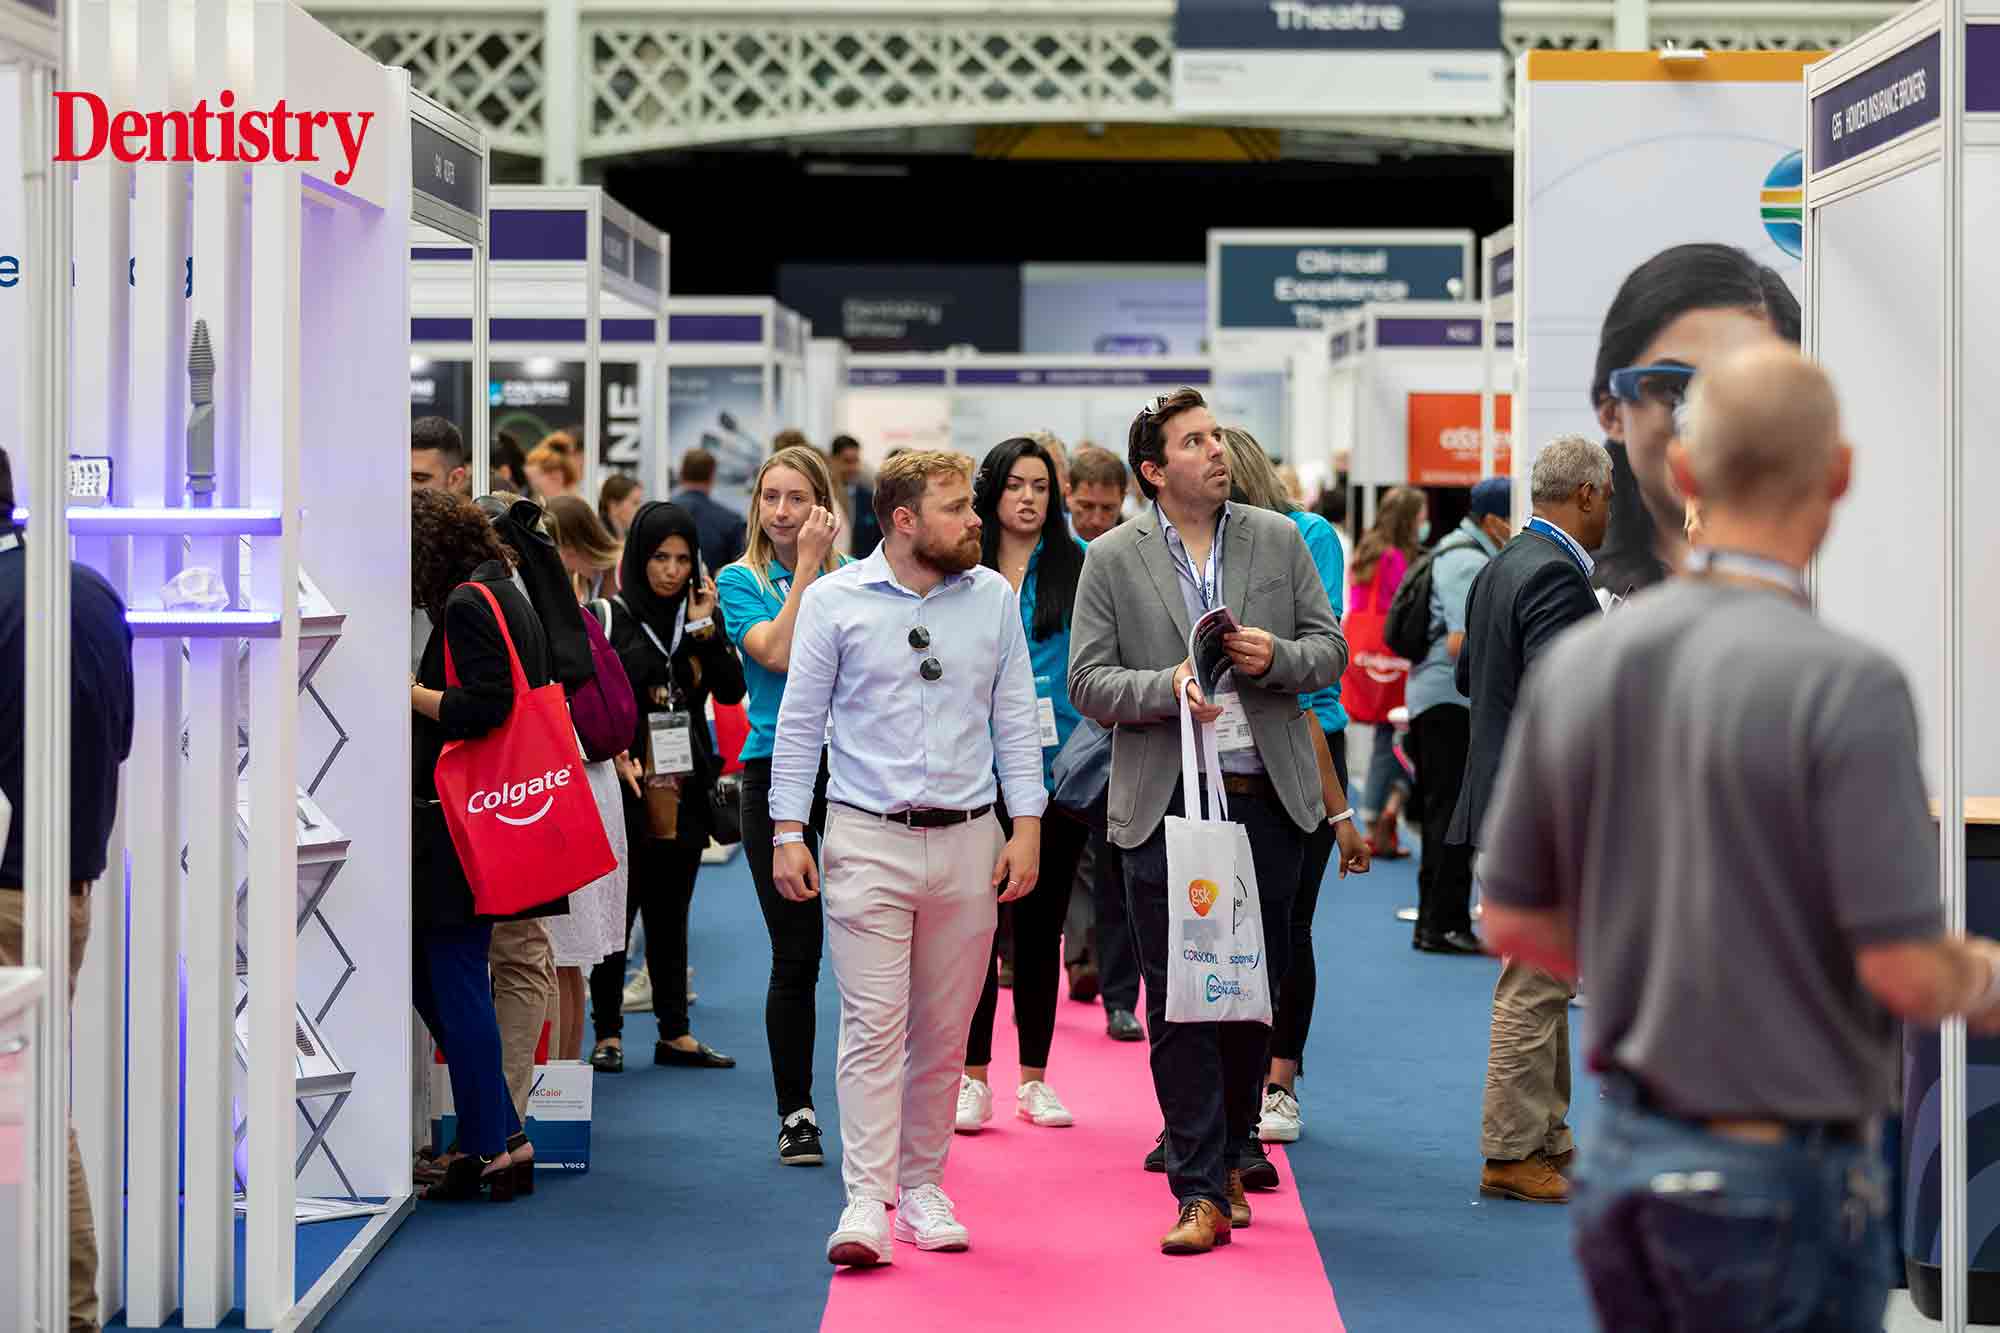 Dentistry Show London – putting your best foot forward at events